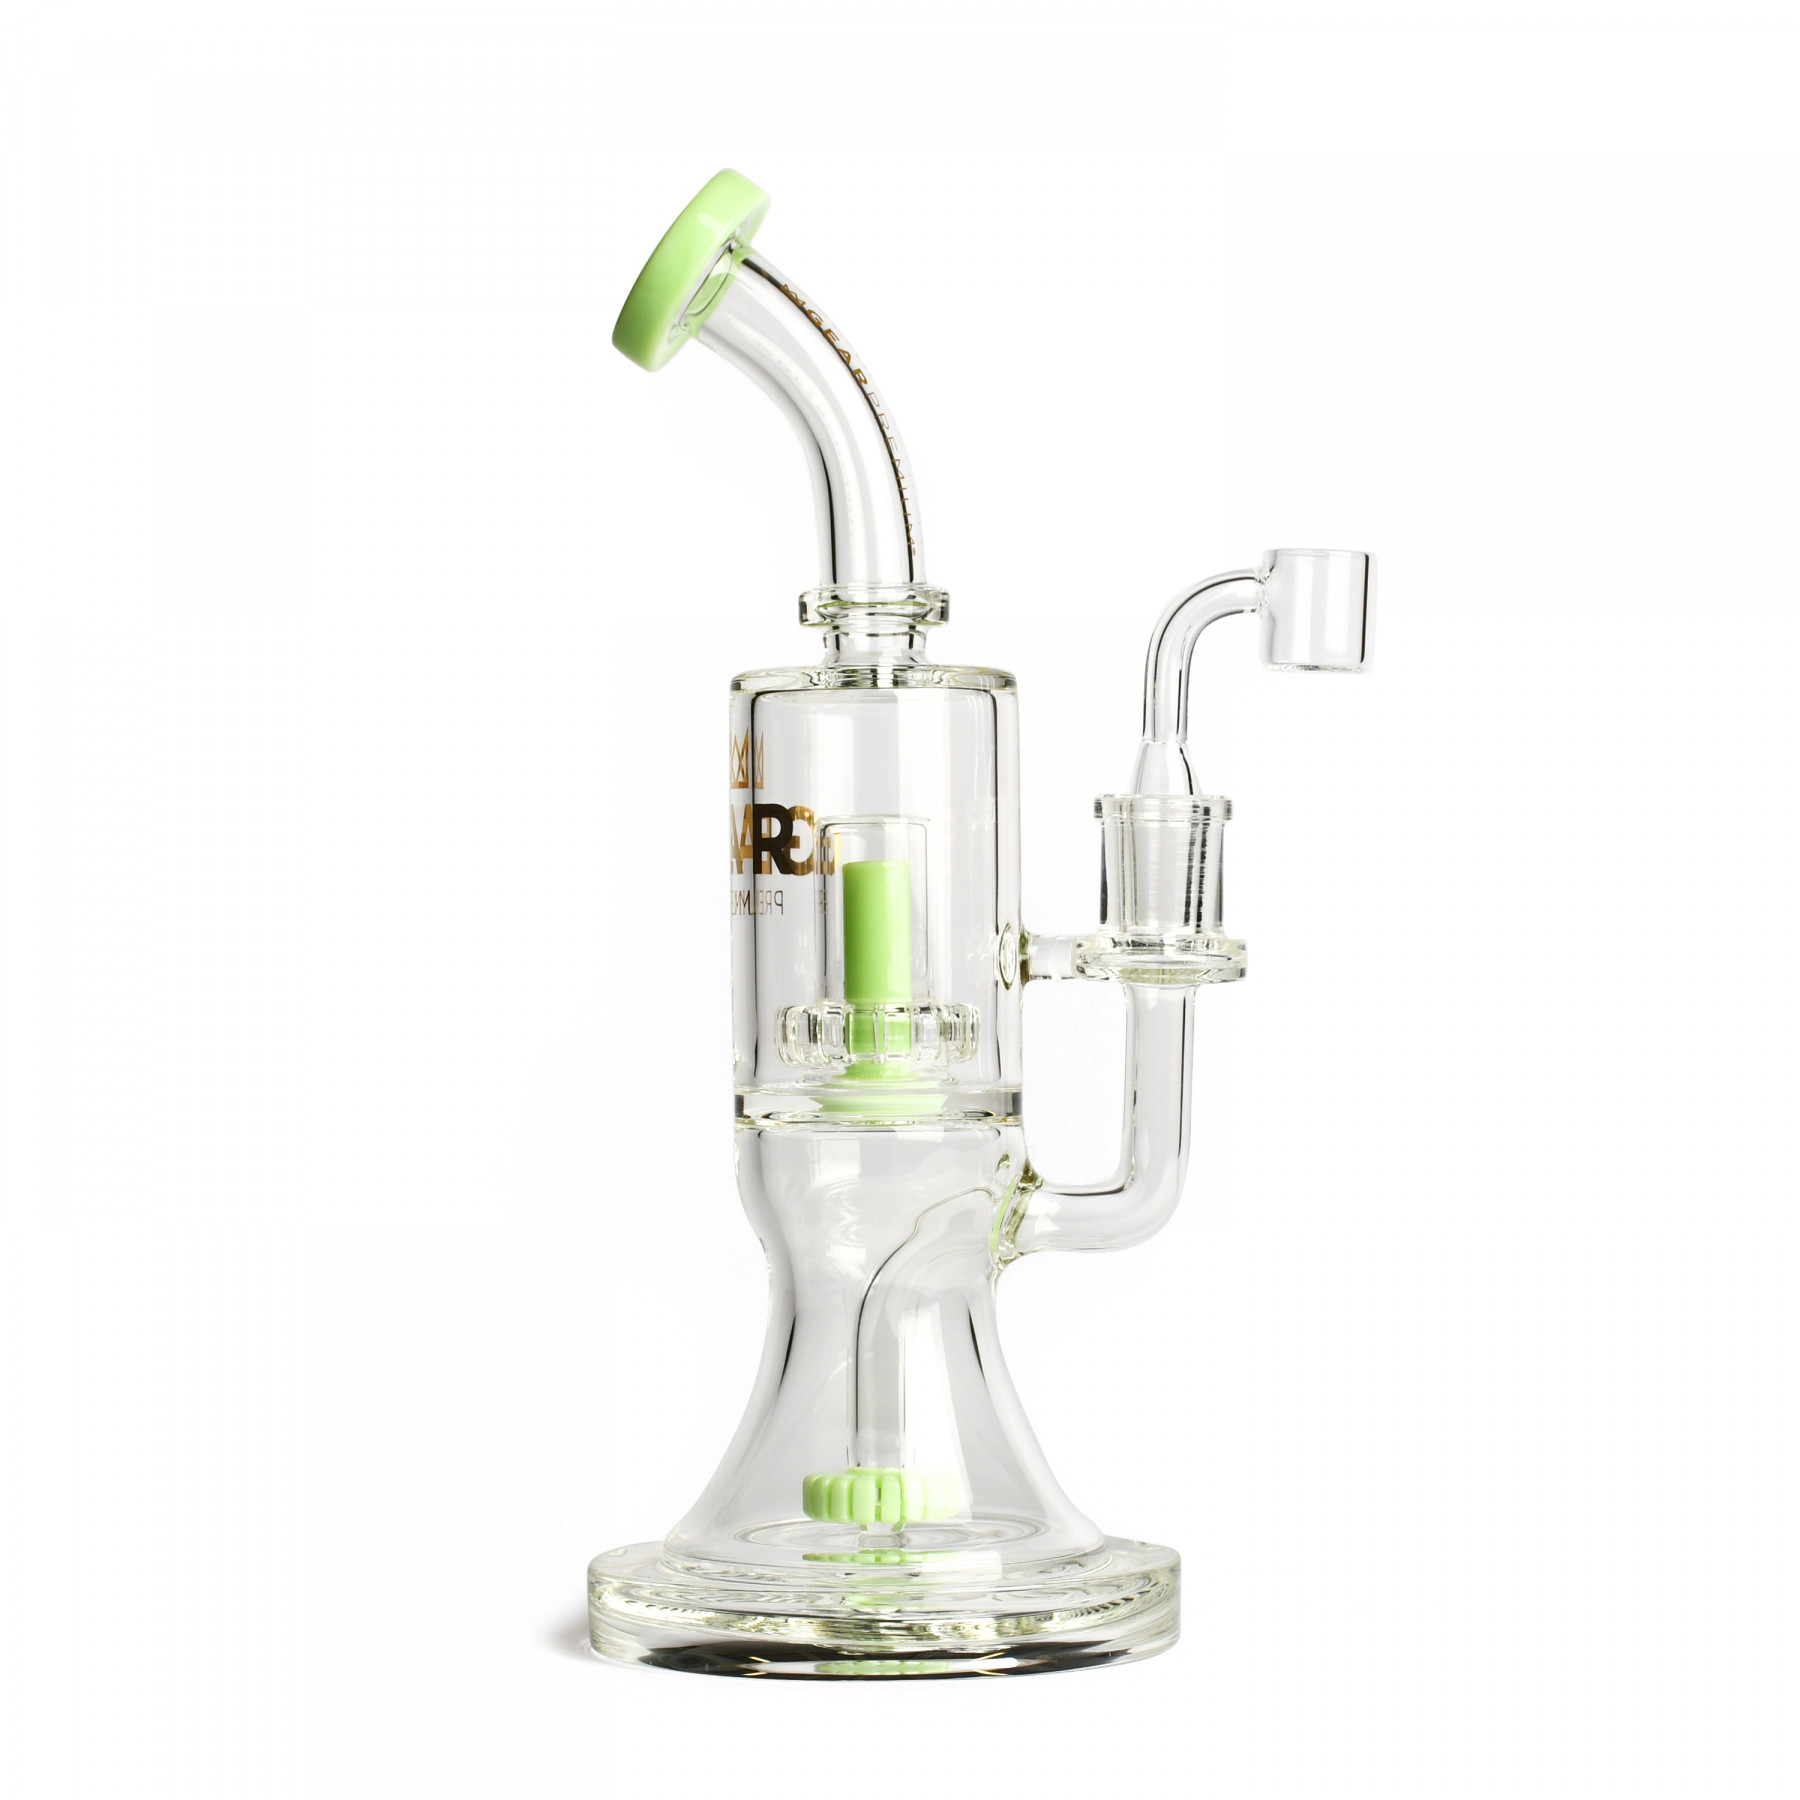 8" Ethereal Dual Chamber Concentrate Bubbler